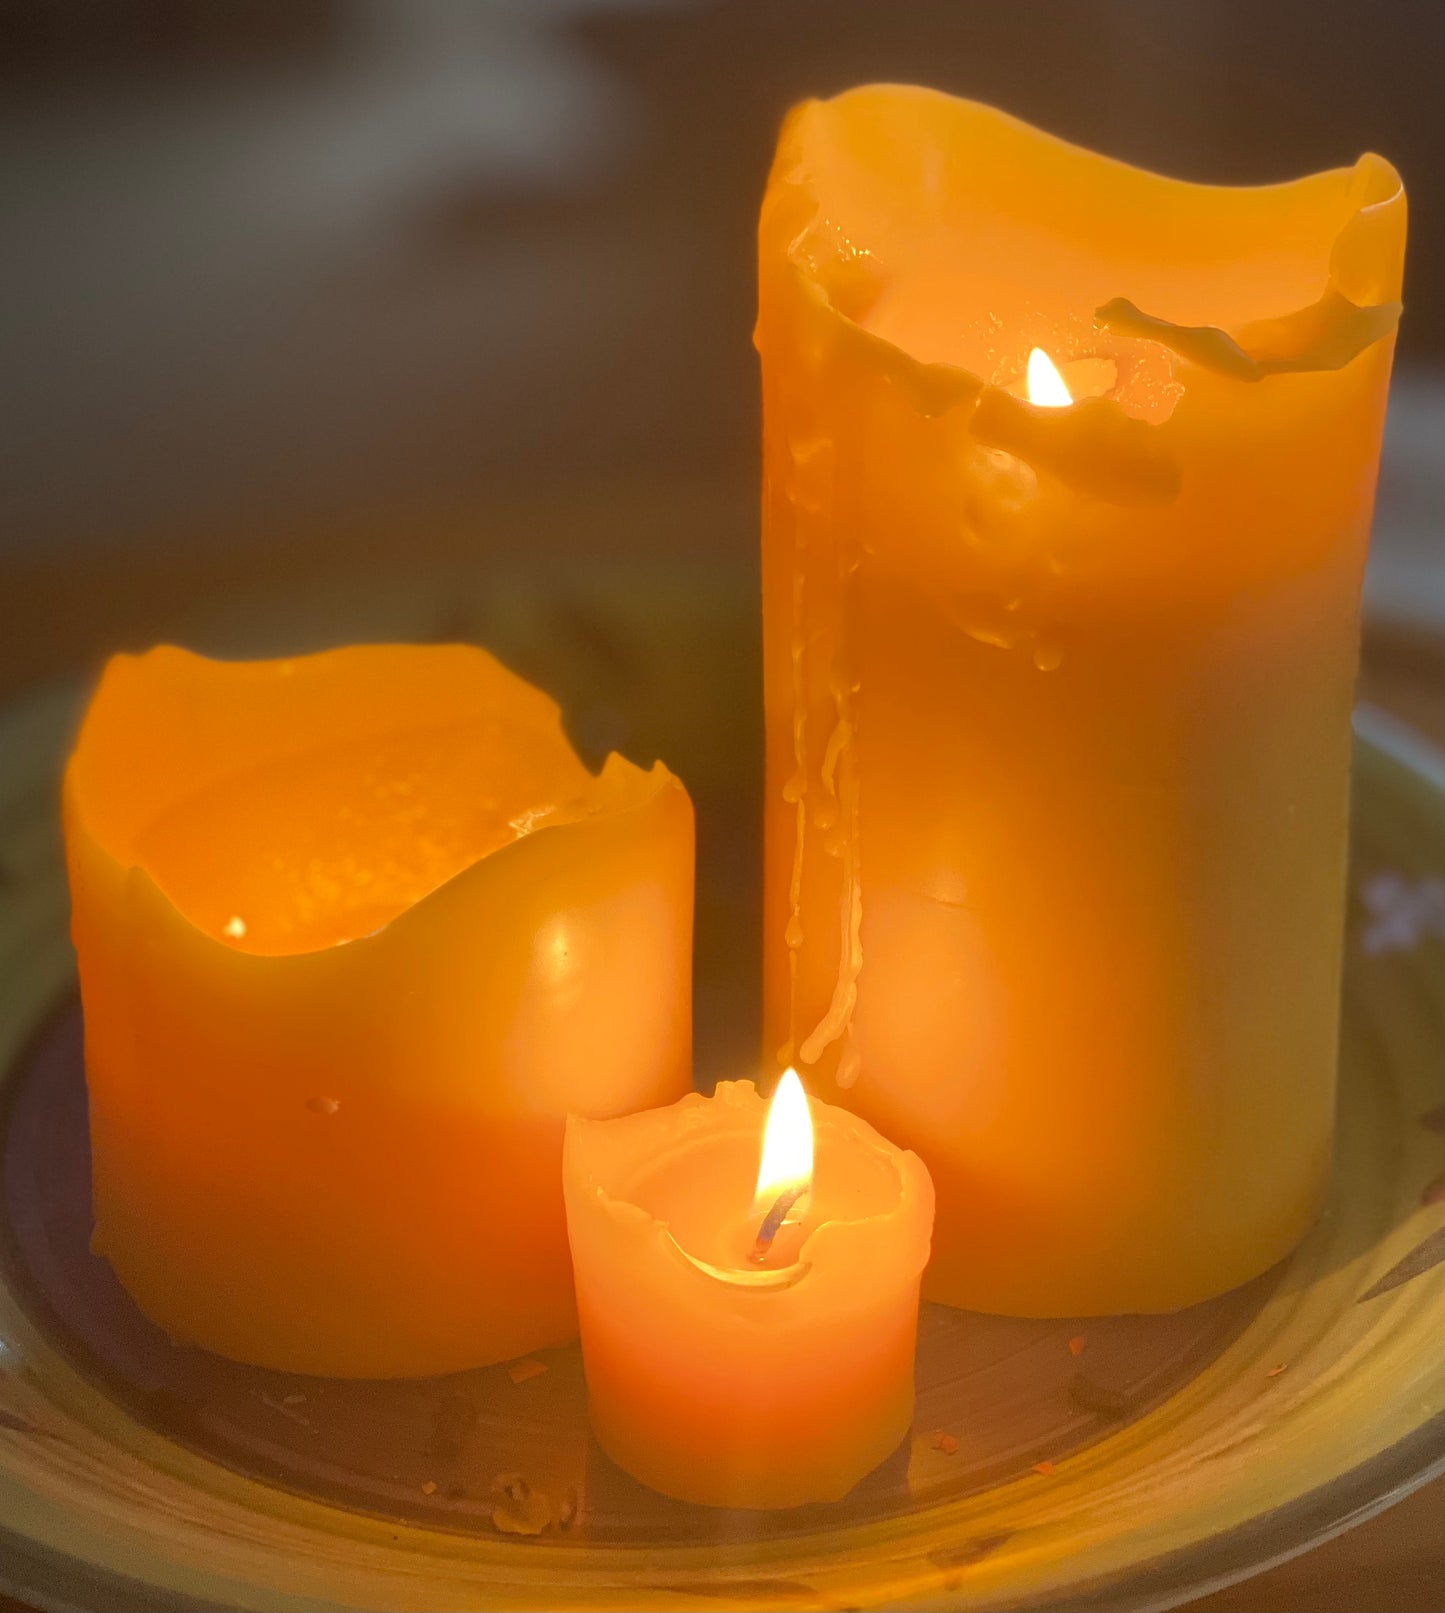 Picture of beeswax pillar candles alight. picture shows how they can look when burning and alight from within